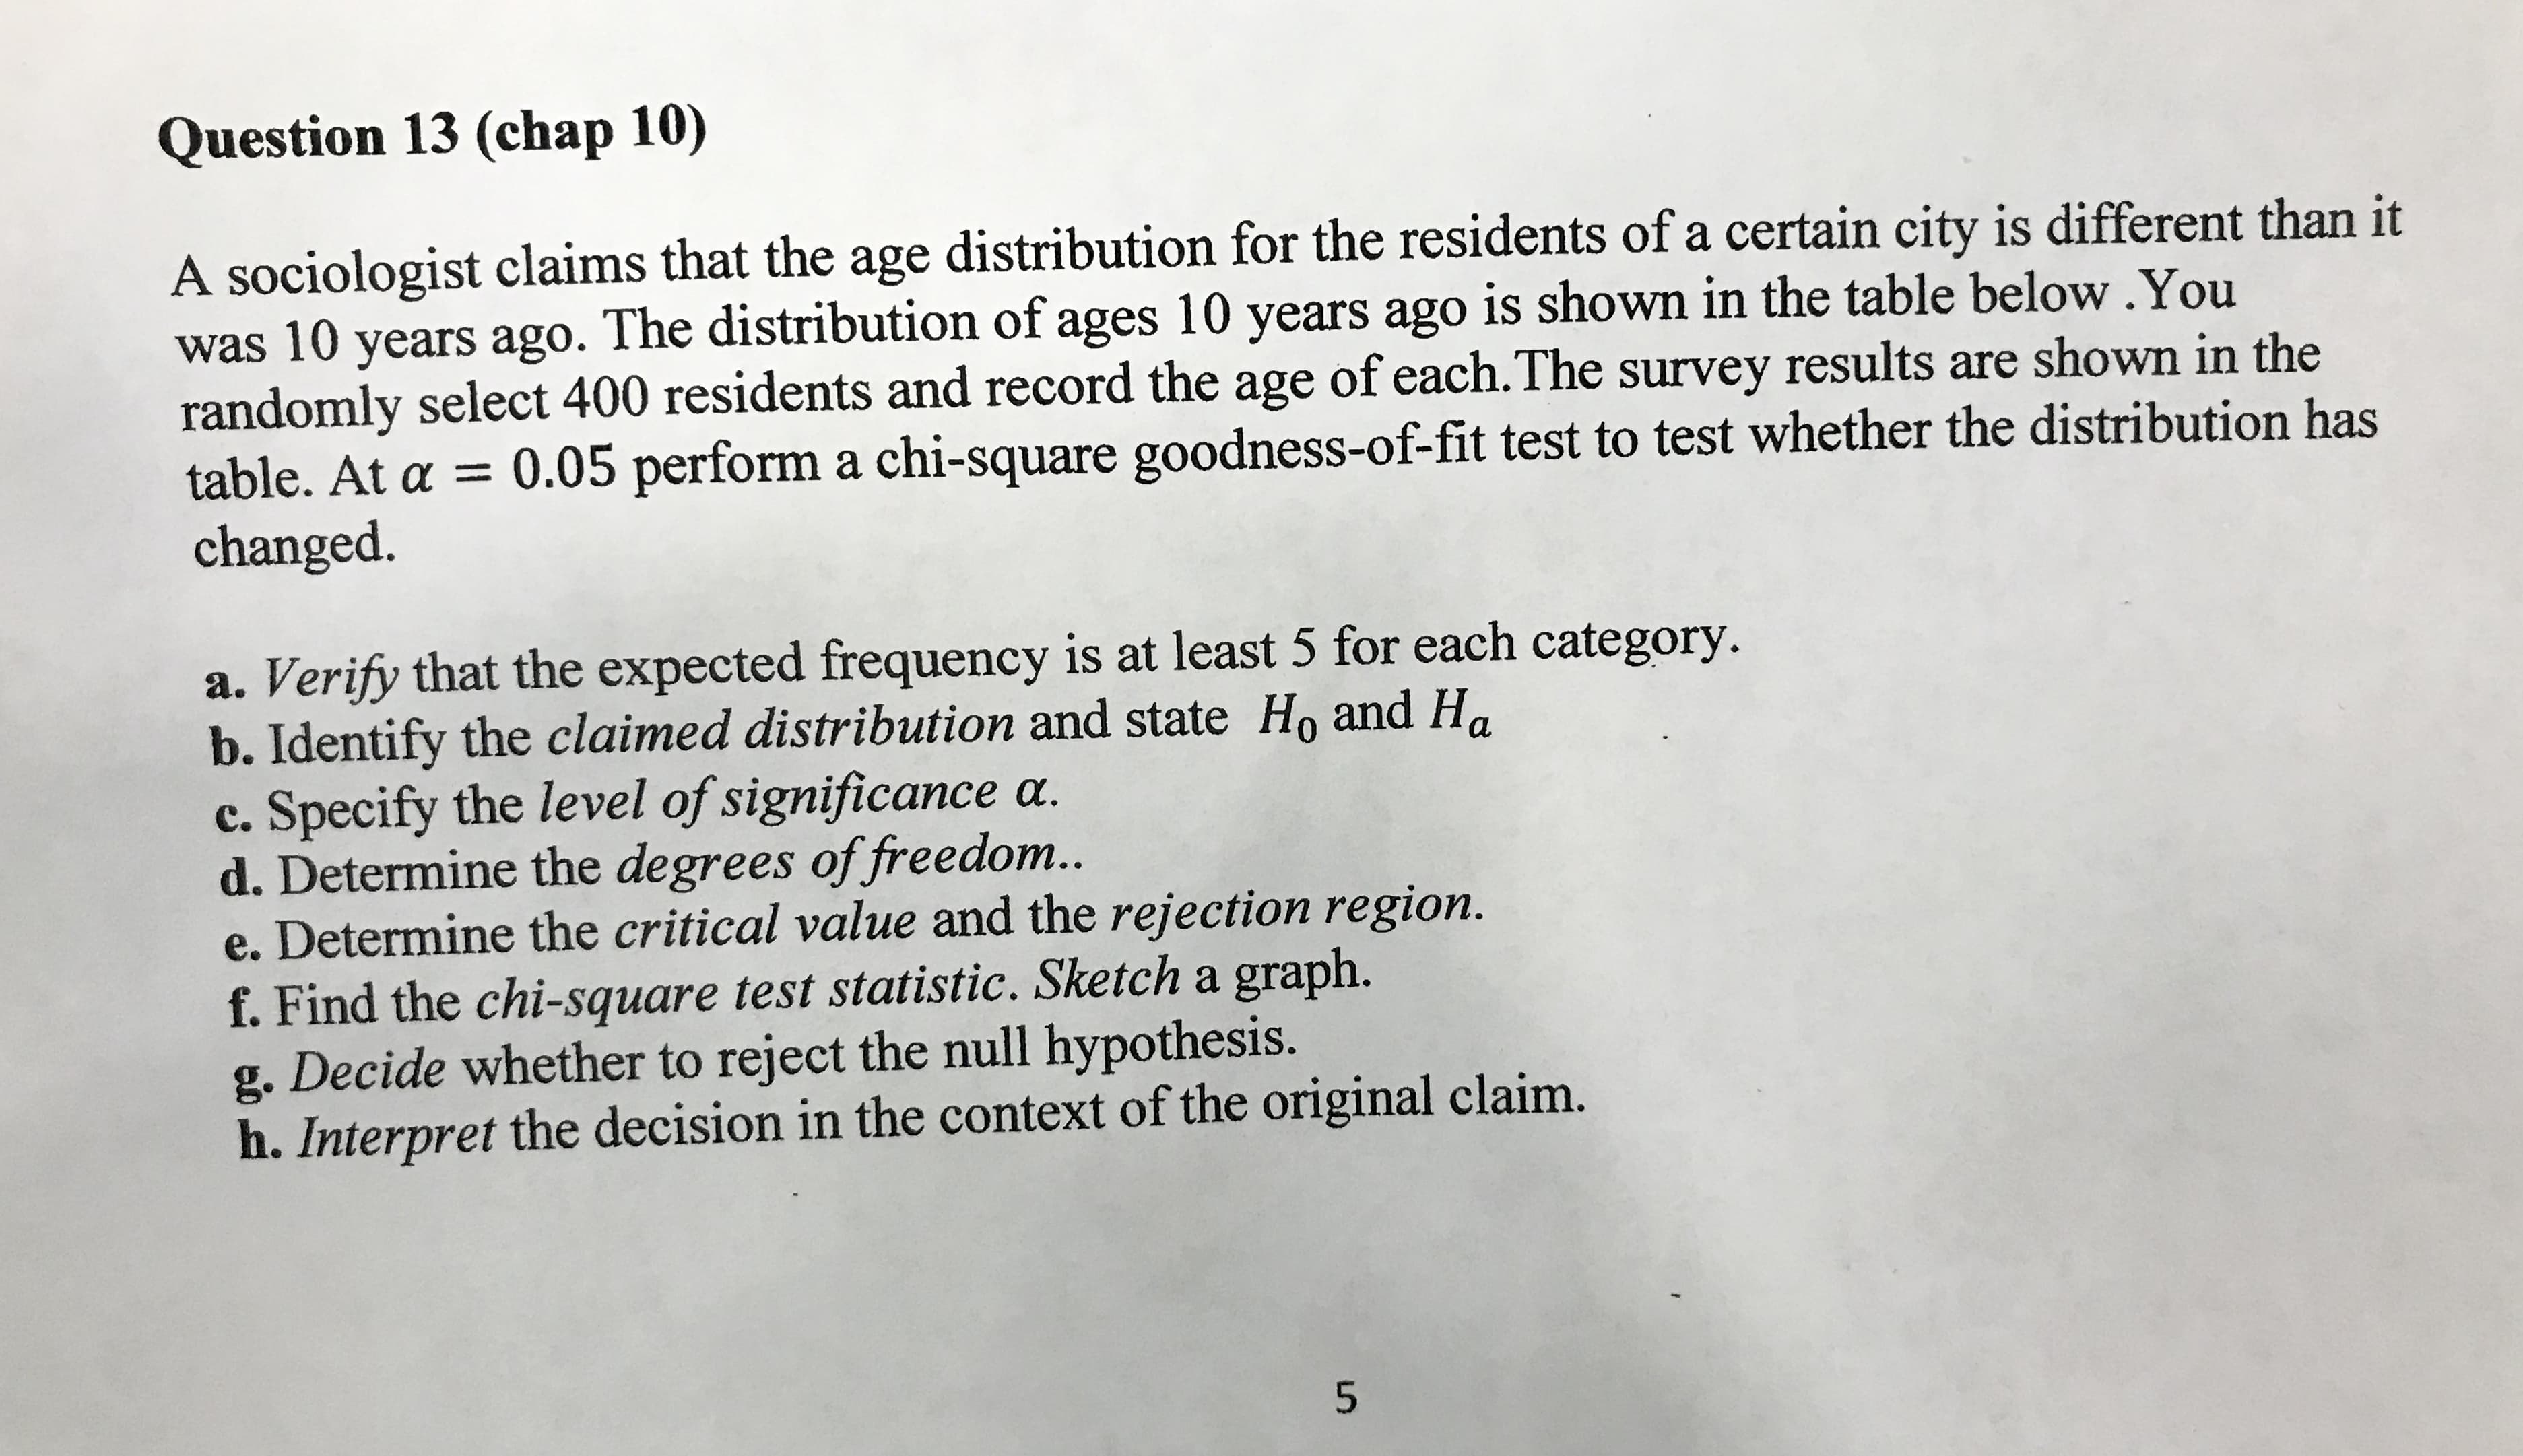 Question 13 (chap 10)
A sociologist claims that the age distribution for the residents of a certain city is different than it
was 10 years ago. The distribution of ages 10 years ago is shown in the table below.You
randomly select 400 residents and record the age of each.The survey results are shown in the
table. At a = 0.05 perform a chi-square goodness-of-fit test to test whether the distribution has
changed.
a. Verify that the expected frequency is at least 5 for each category.
b. Identify the claimed distribution and state Ho and Ha
c. Specify the level of significance a.
d. Determine the degrees of freedom..
e. Determine the critical value and the rejection region.
f. Find the chi-square test statistic. Sketch a graph.
g. Decide whether to reject the null hypothesis.
h. Interpret the decision in the context of the original claim.
